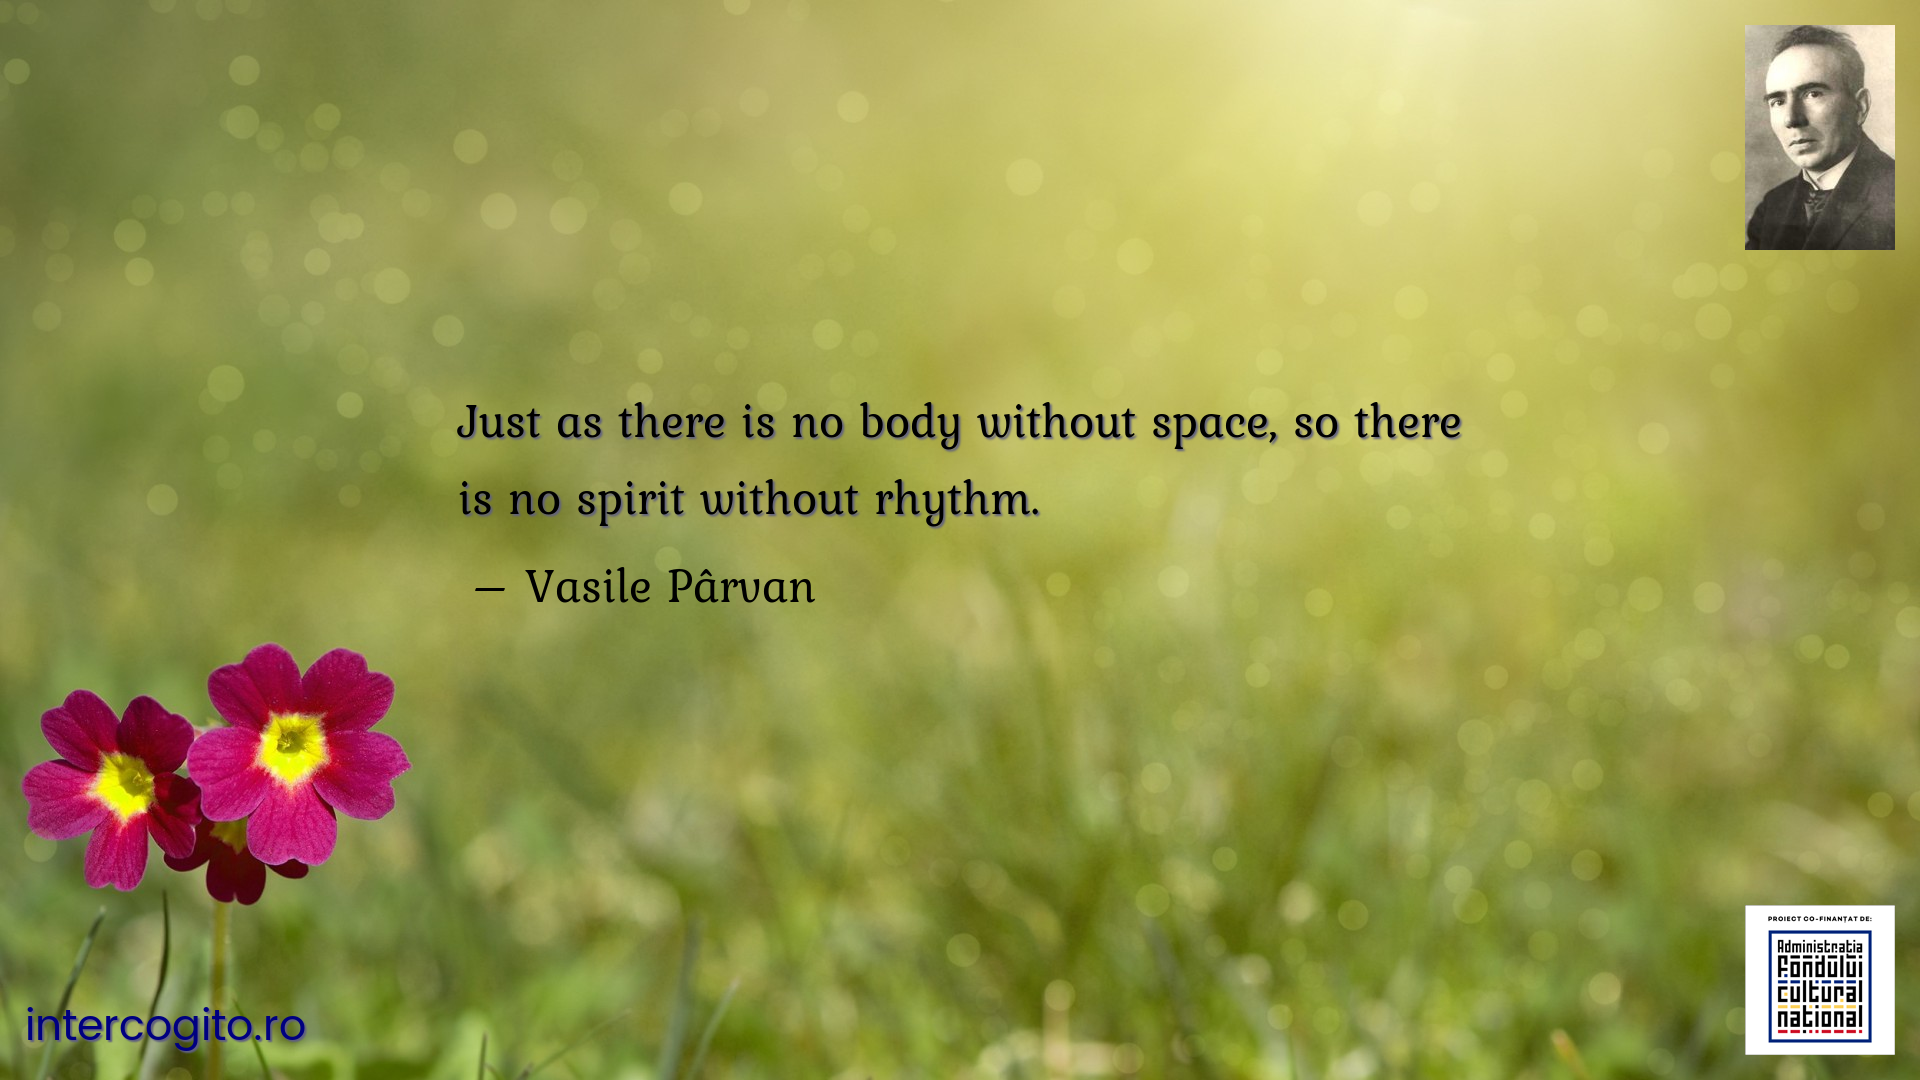 Just as there is no body without space, so there is no spirit without rhythm.